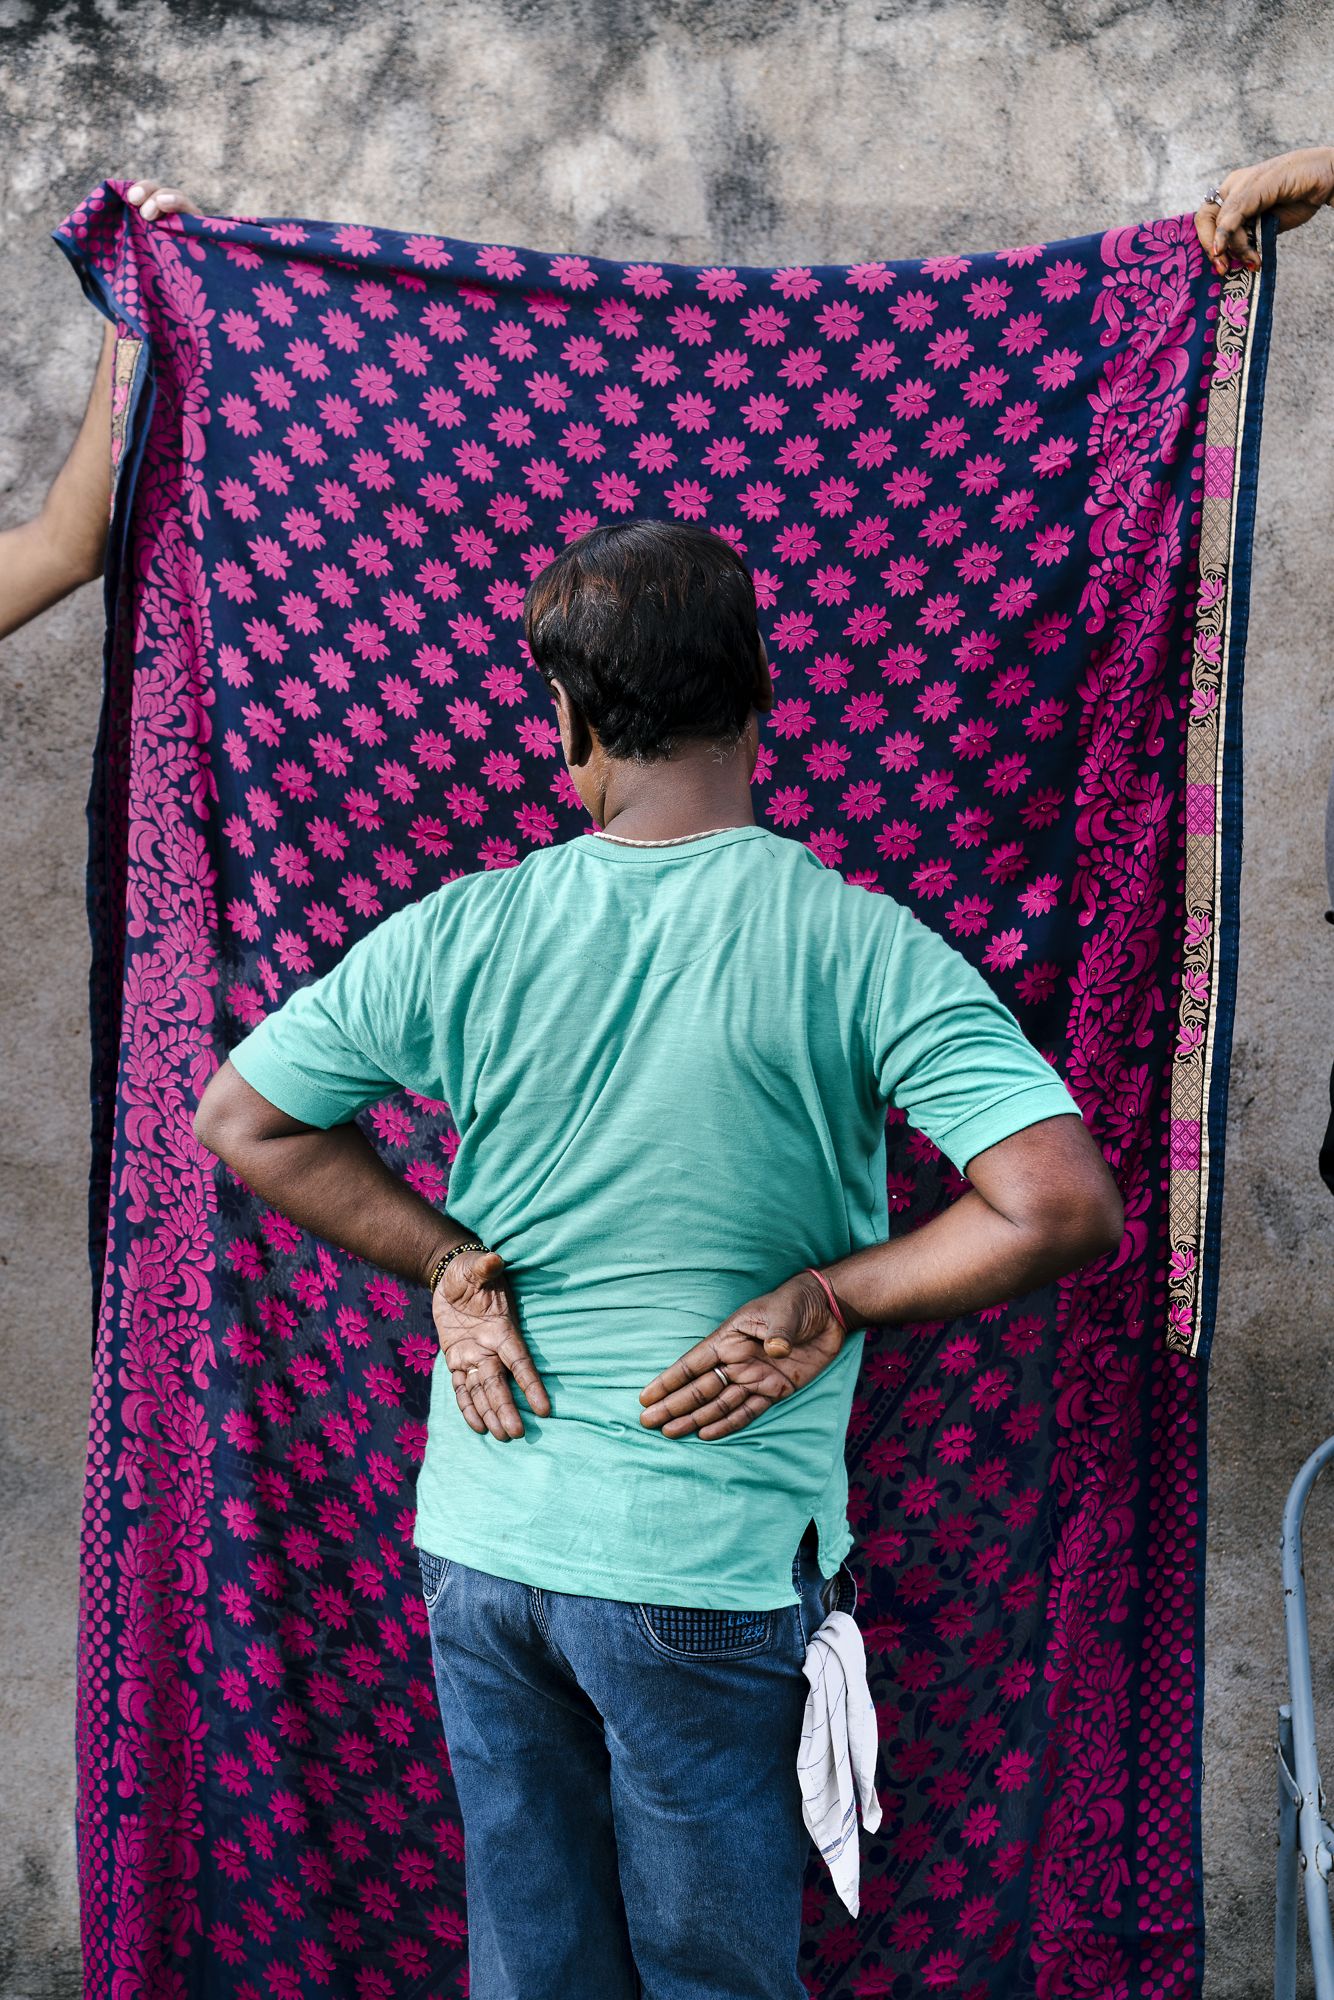 A gay man from the city of Patna poses for a portrait. He is not out, so he preferred to hide his identity. Patna is the capital city of Bihar State, considered one of the country’s most rural, and acceptance for the country’s LGBTQ community has been slow to arrive. Image by Jake Naughton and Aarti Singh. India, 2017.